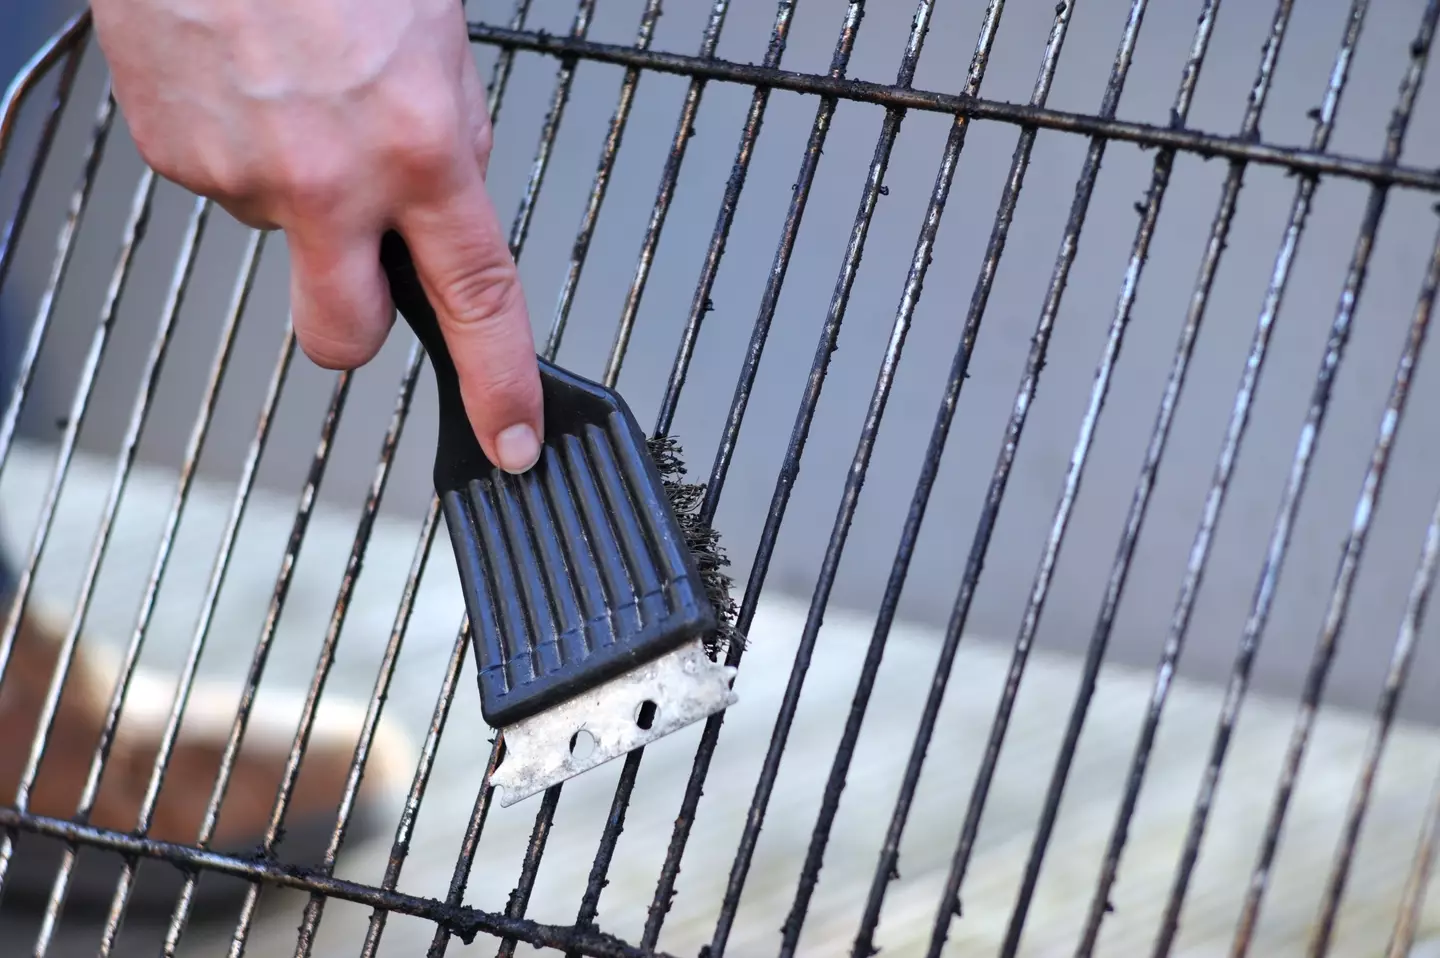 One woman shared her genius BBQ cleaning hack. (wakila / Getty Images)